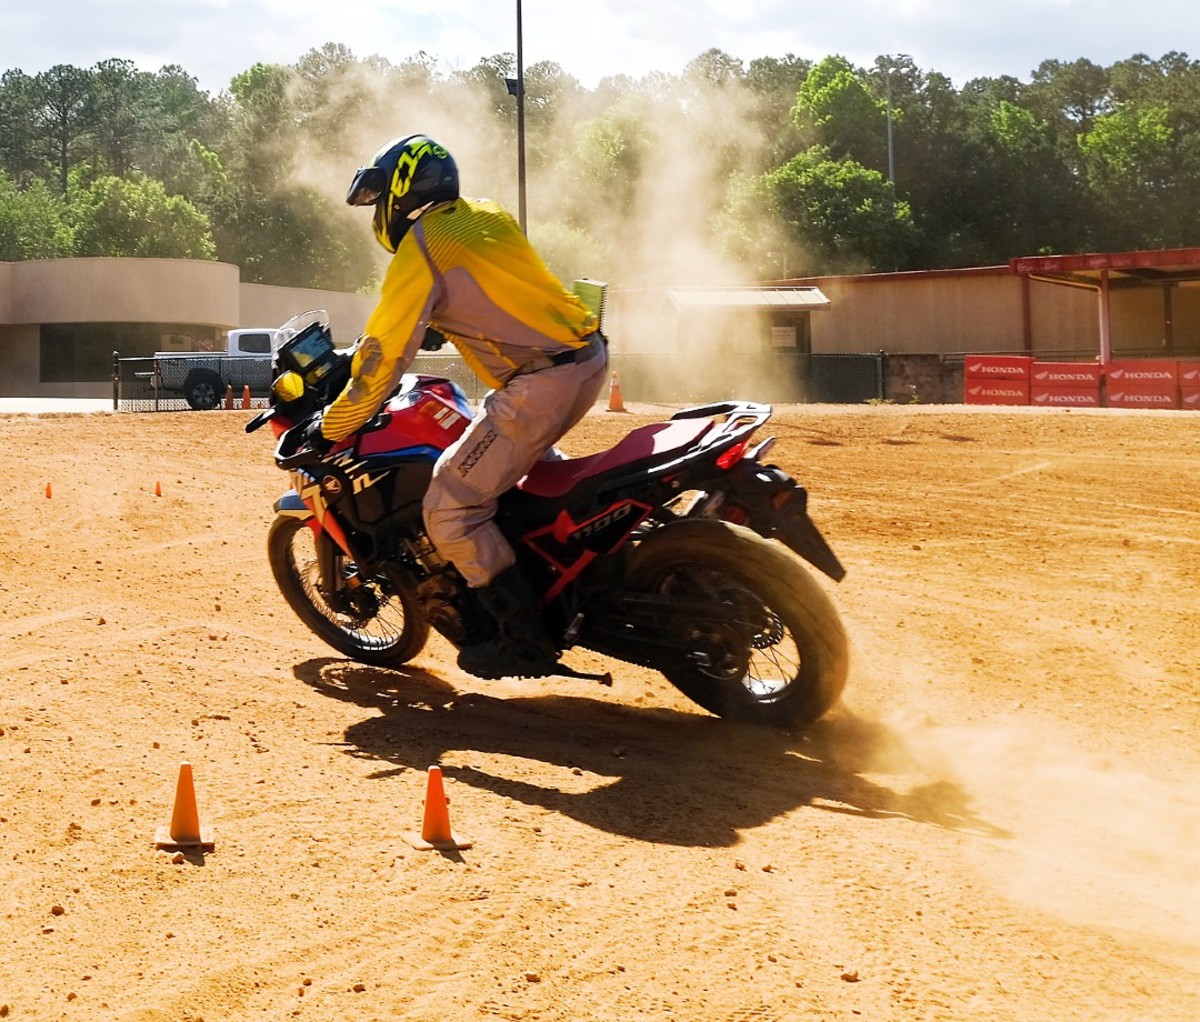 Riding motorcycle on dirt